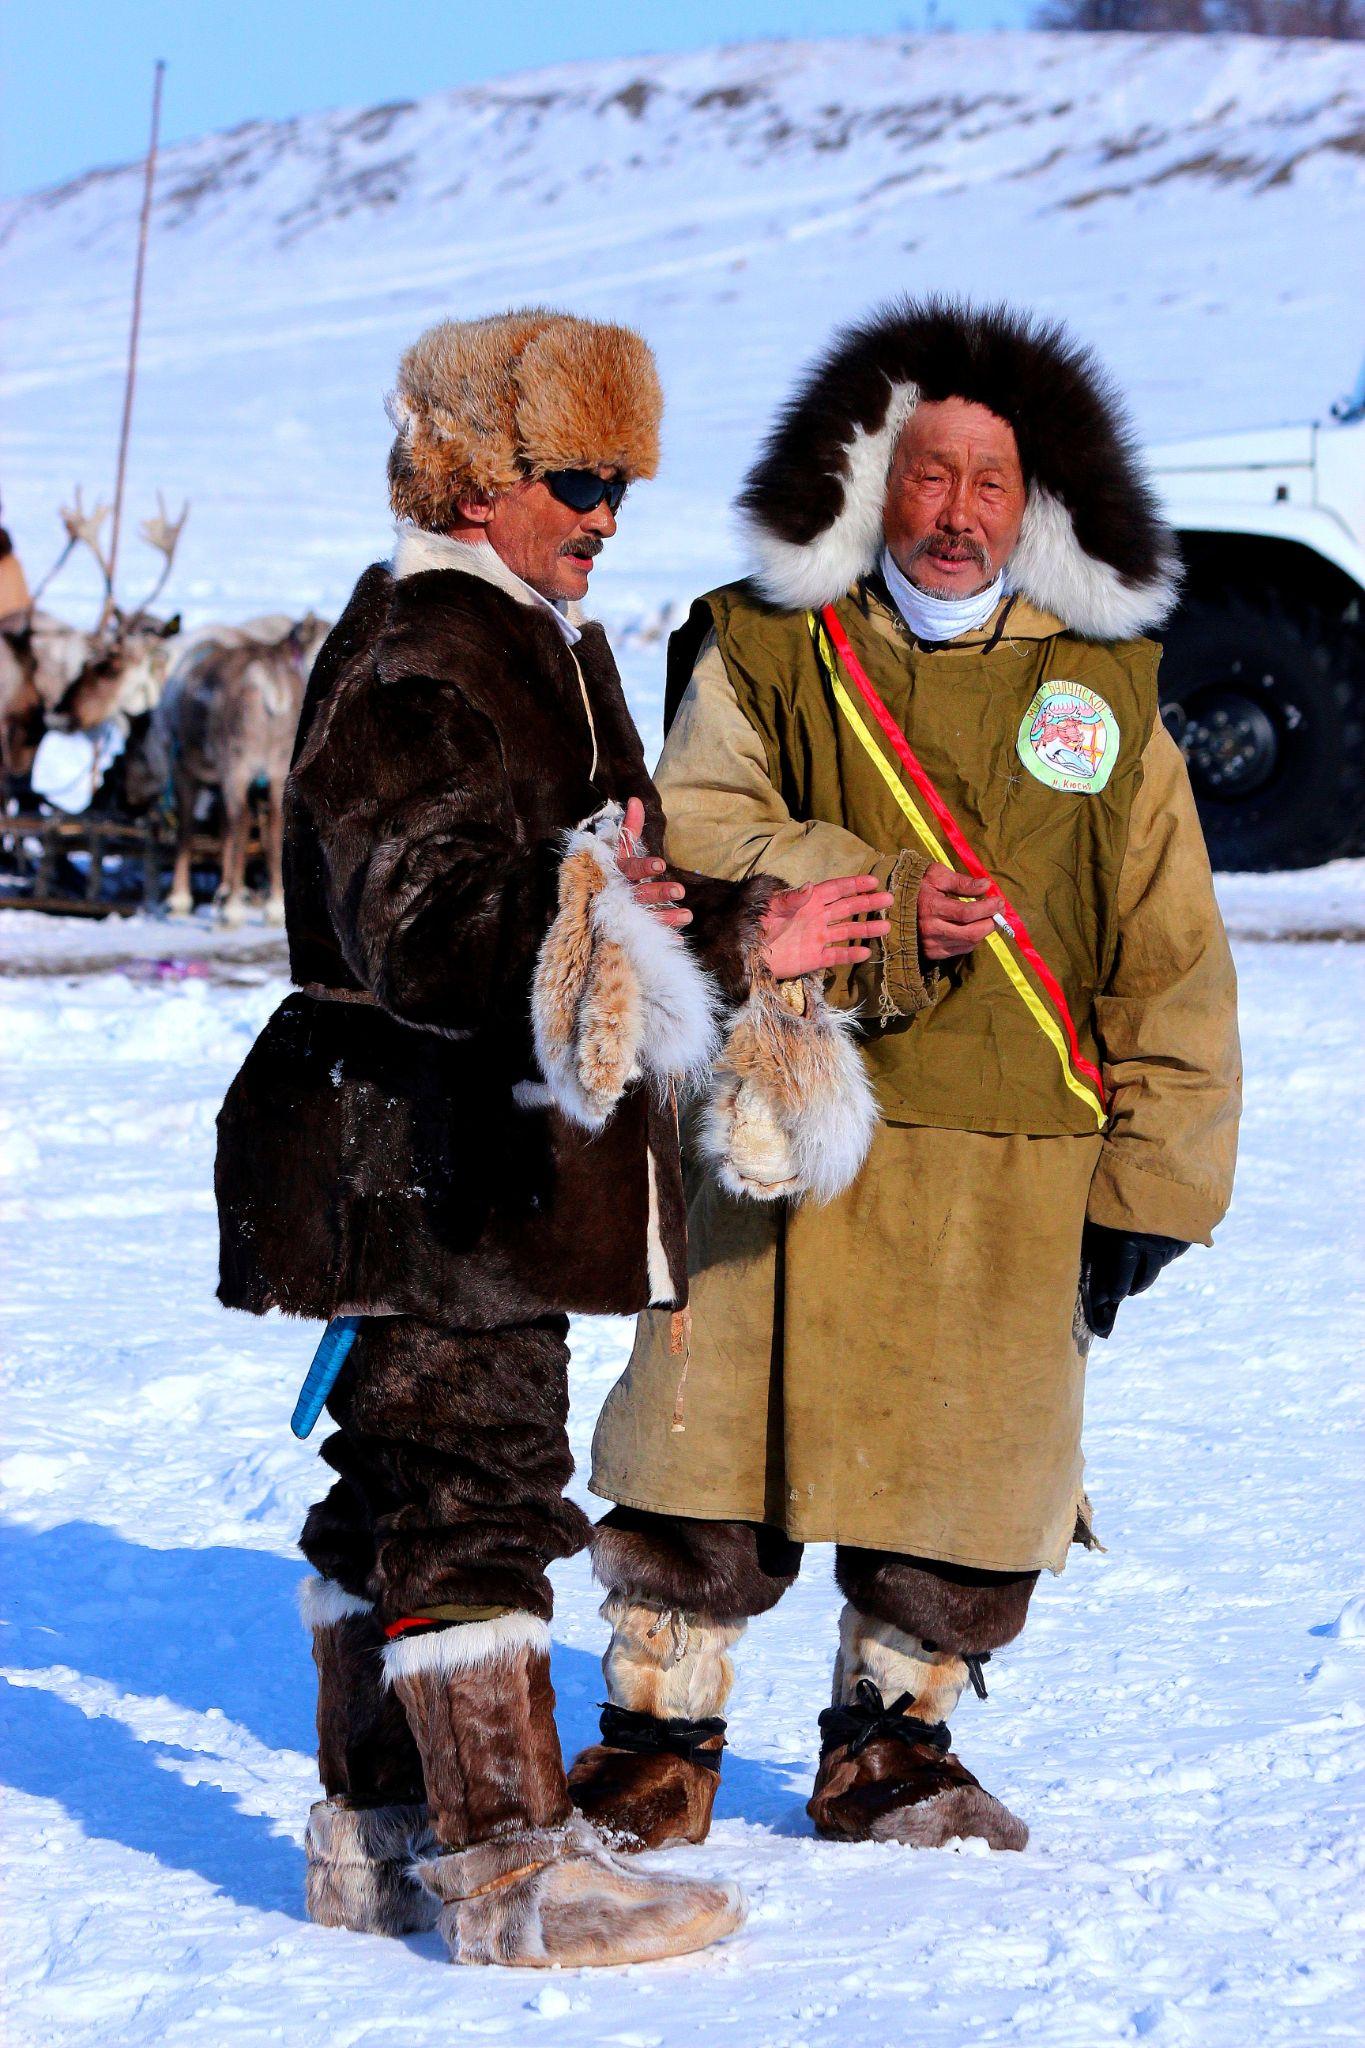 Two Inuit men in fur jackets standing on the snow.